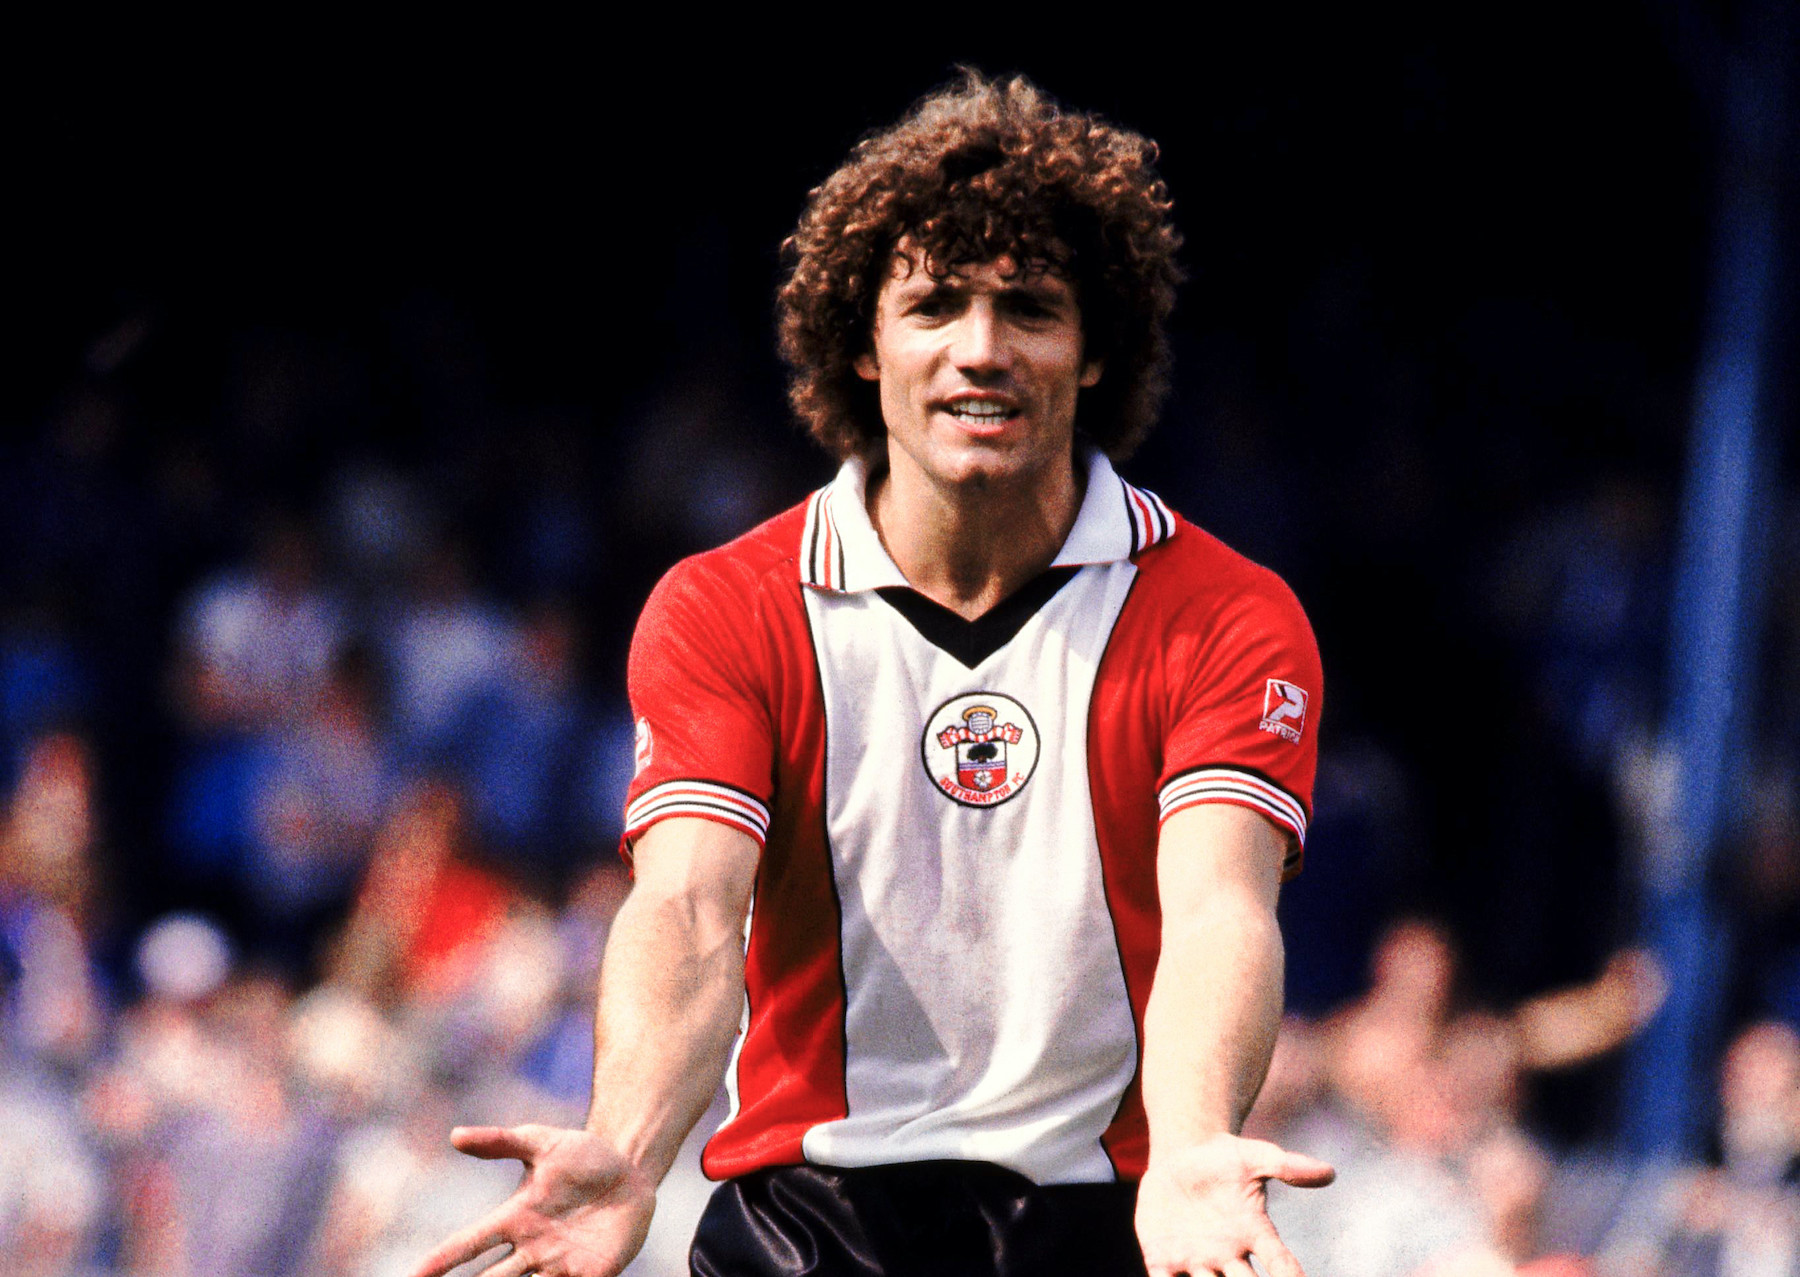 When Southampton signed the two-time Ballon d'Or winner Kevin Keegan - and no-one knew about it